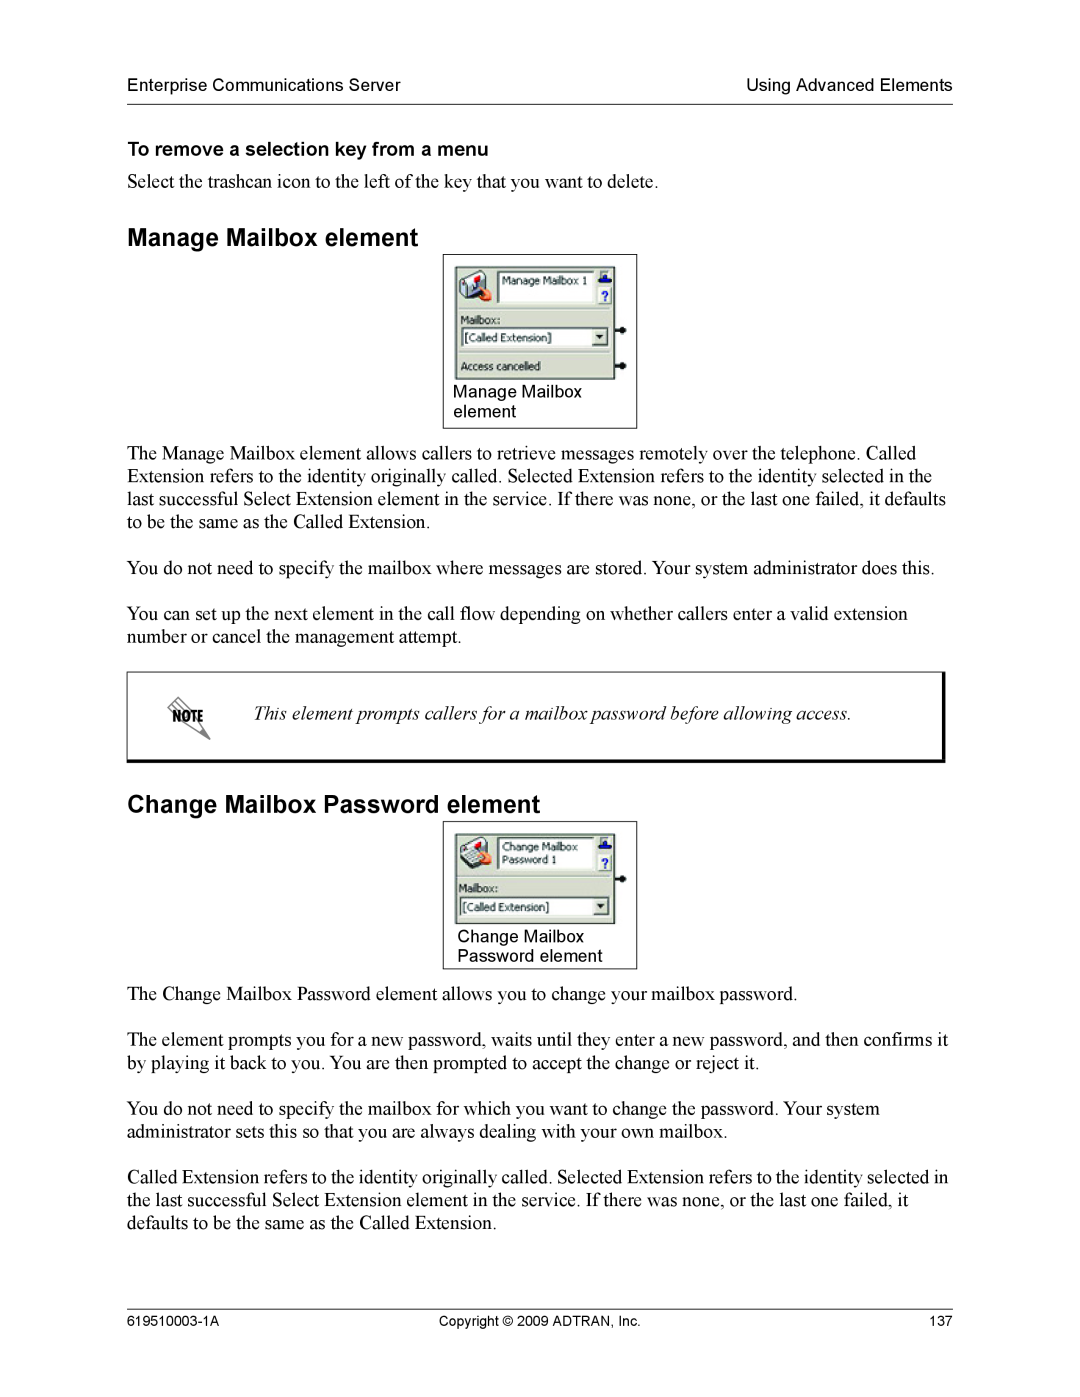 ADTRAN 619510003-1A manual Manage Mailbox element, Change Mailbox Password element, To remove a selection key from a menu 